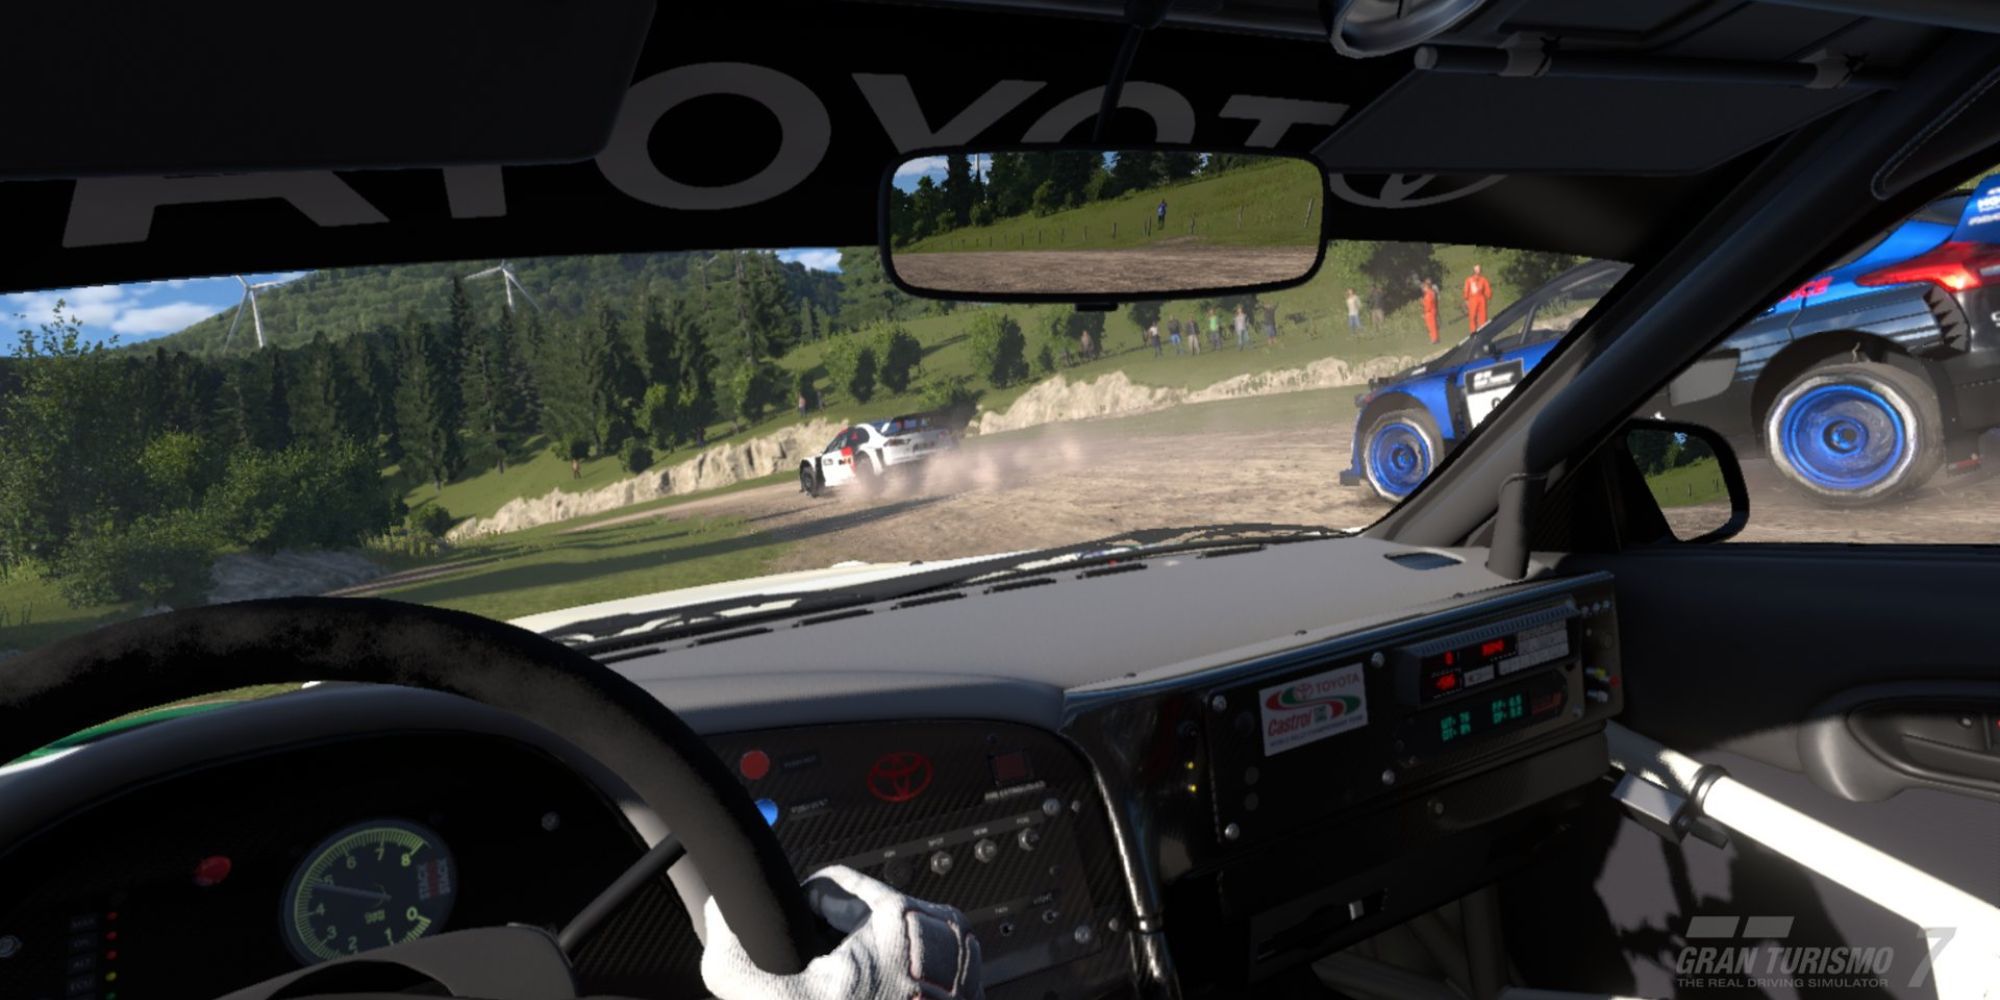 An image from Gran Turismo 7 showing the driver's perspective from inside a rally car on a rally track